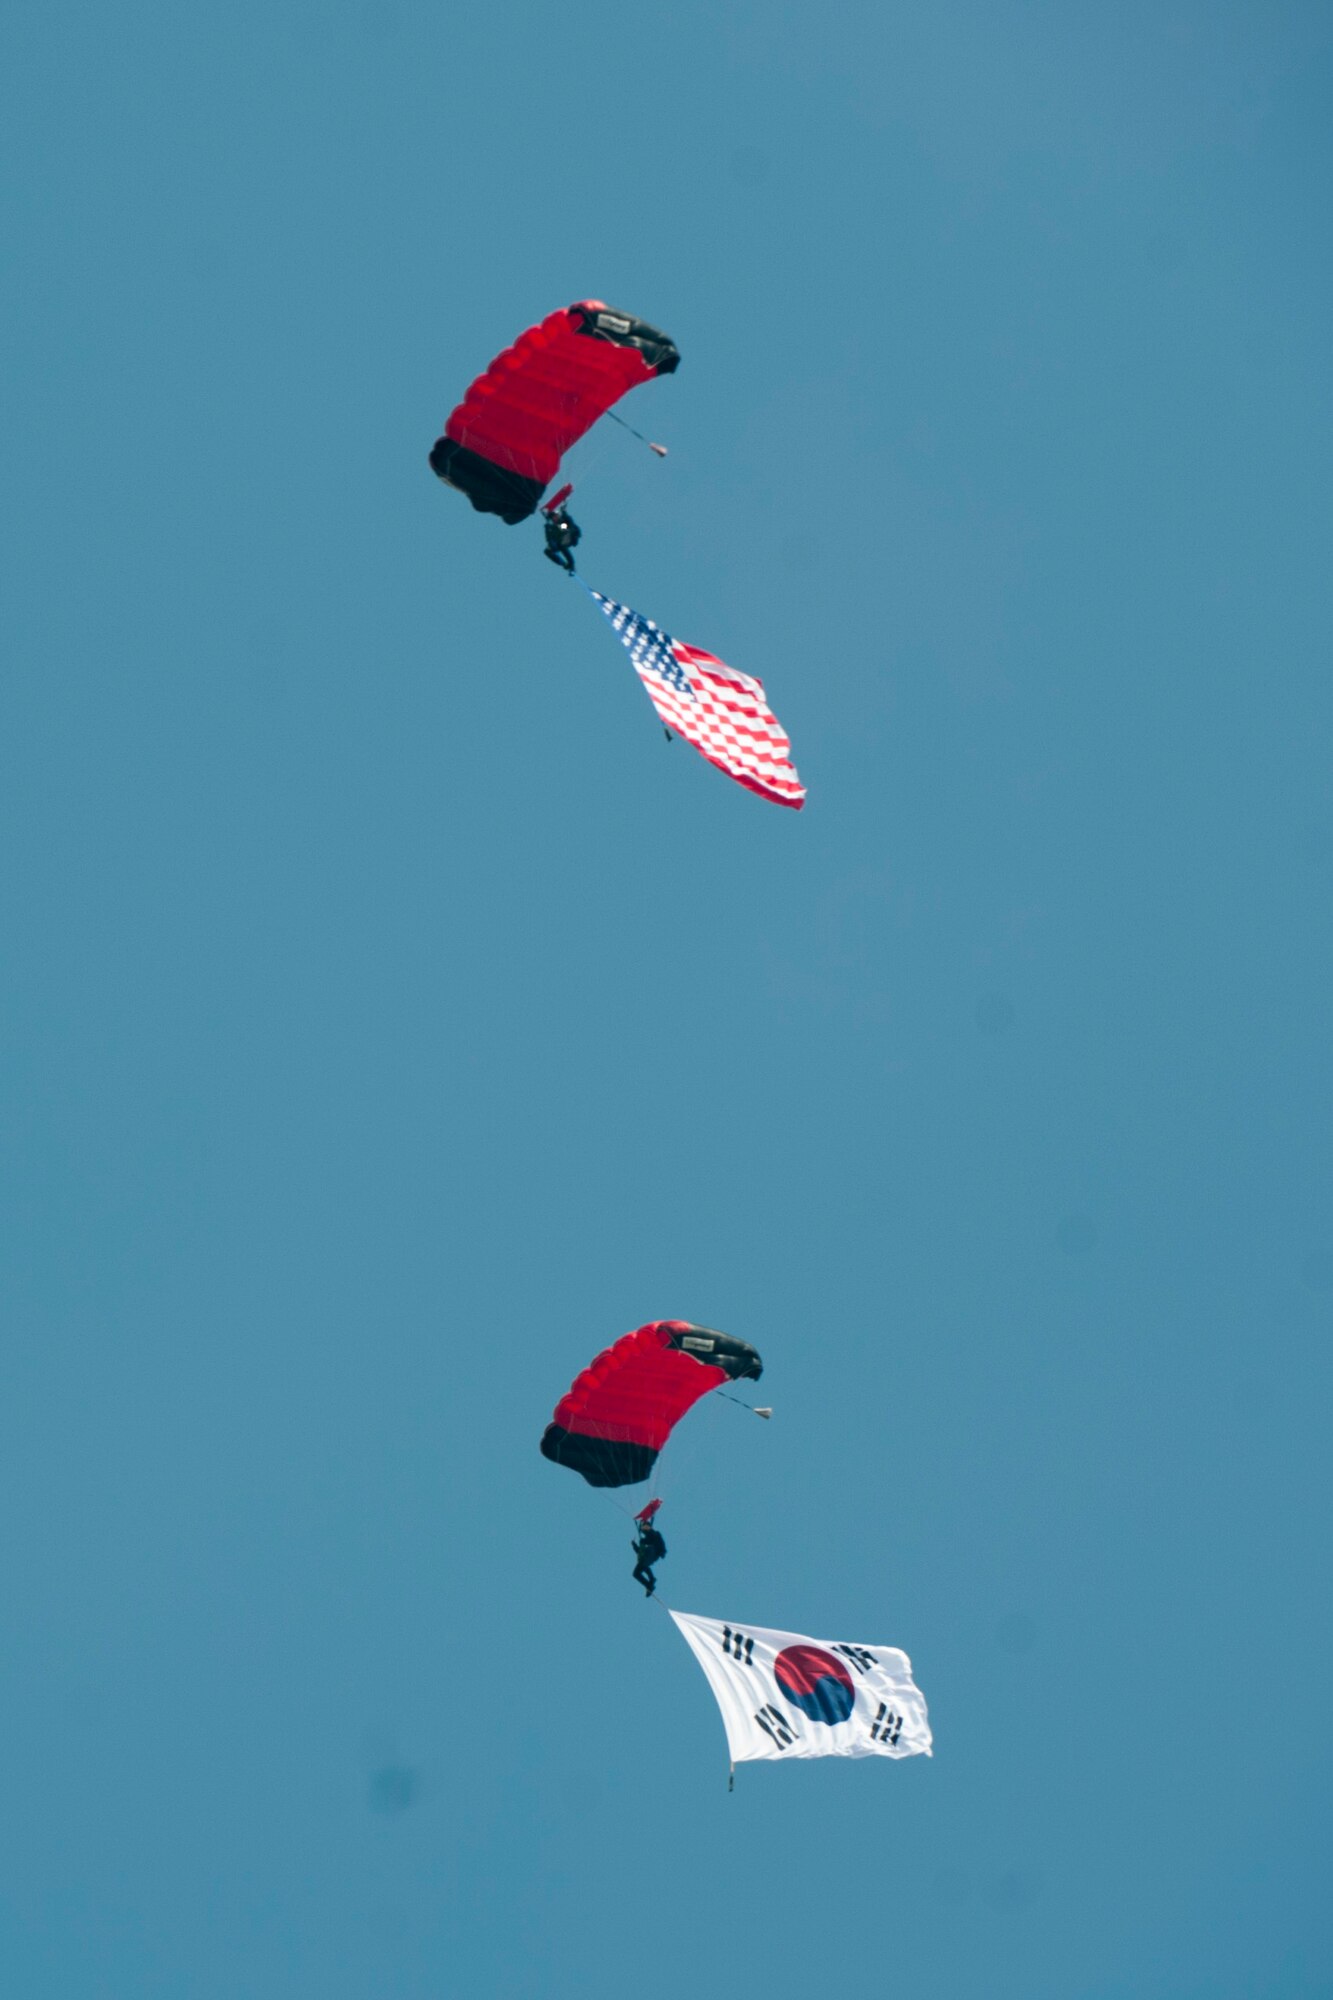 U.S. and Republic of Korea flags sail through the sky attached to a Republic of Korea Parachute Demonstration Team parachutist during Air Power Day 2016 on Osan Air Base, Republic of Korea, Sept. 24, 2016. Air Power Day was a chance for U.S. and Korean attendees to get to know one another while watching aerial demonstrations, entertainment and more. (U.S. Air Force photo by Staff Sgt. Jonathan Steffen)